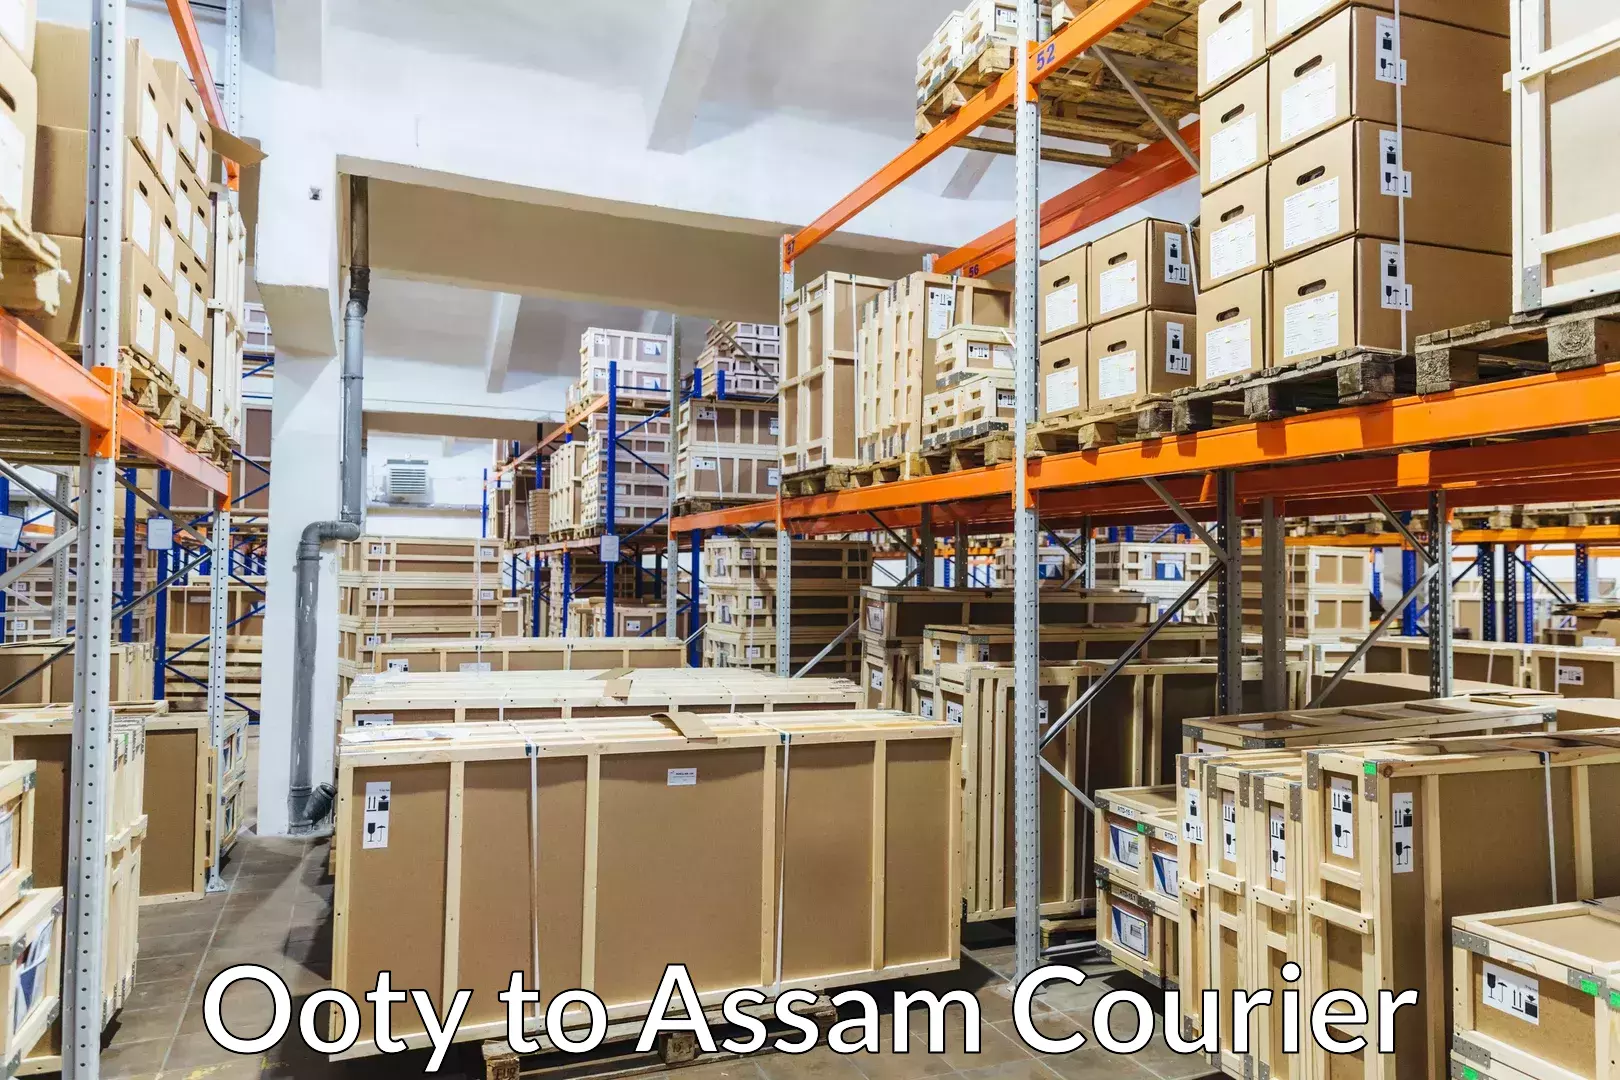 Luggage transport company Ooty to Assam